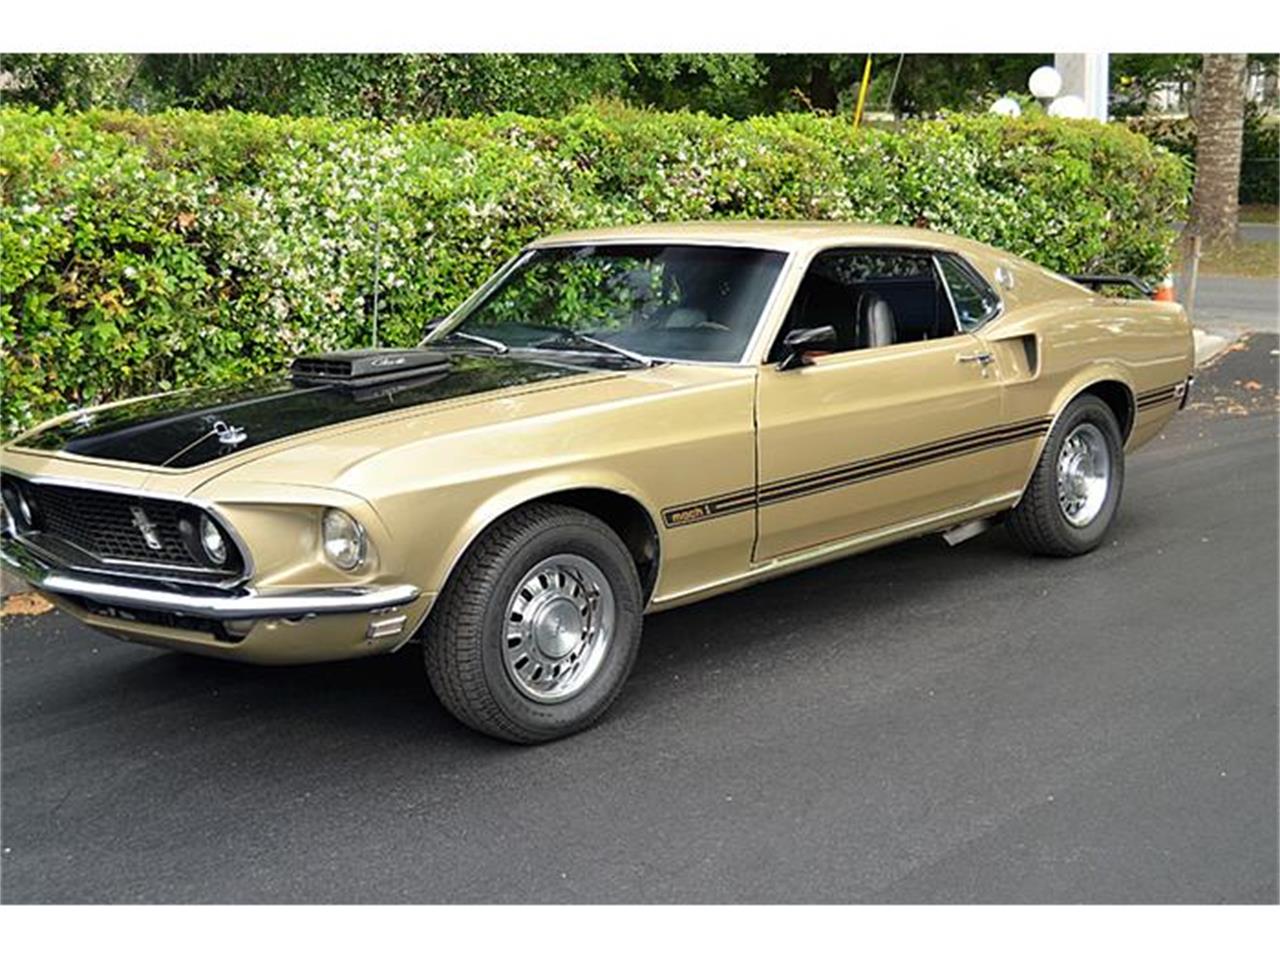 1969 Ford Mustang Mach 1 for Sale | ClassicCars.com | CC-843870